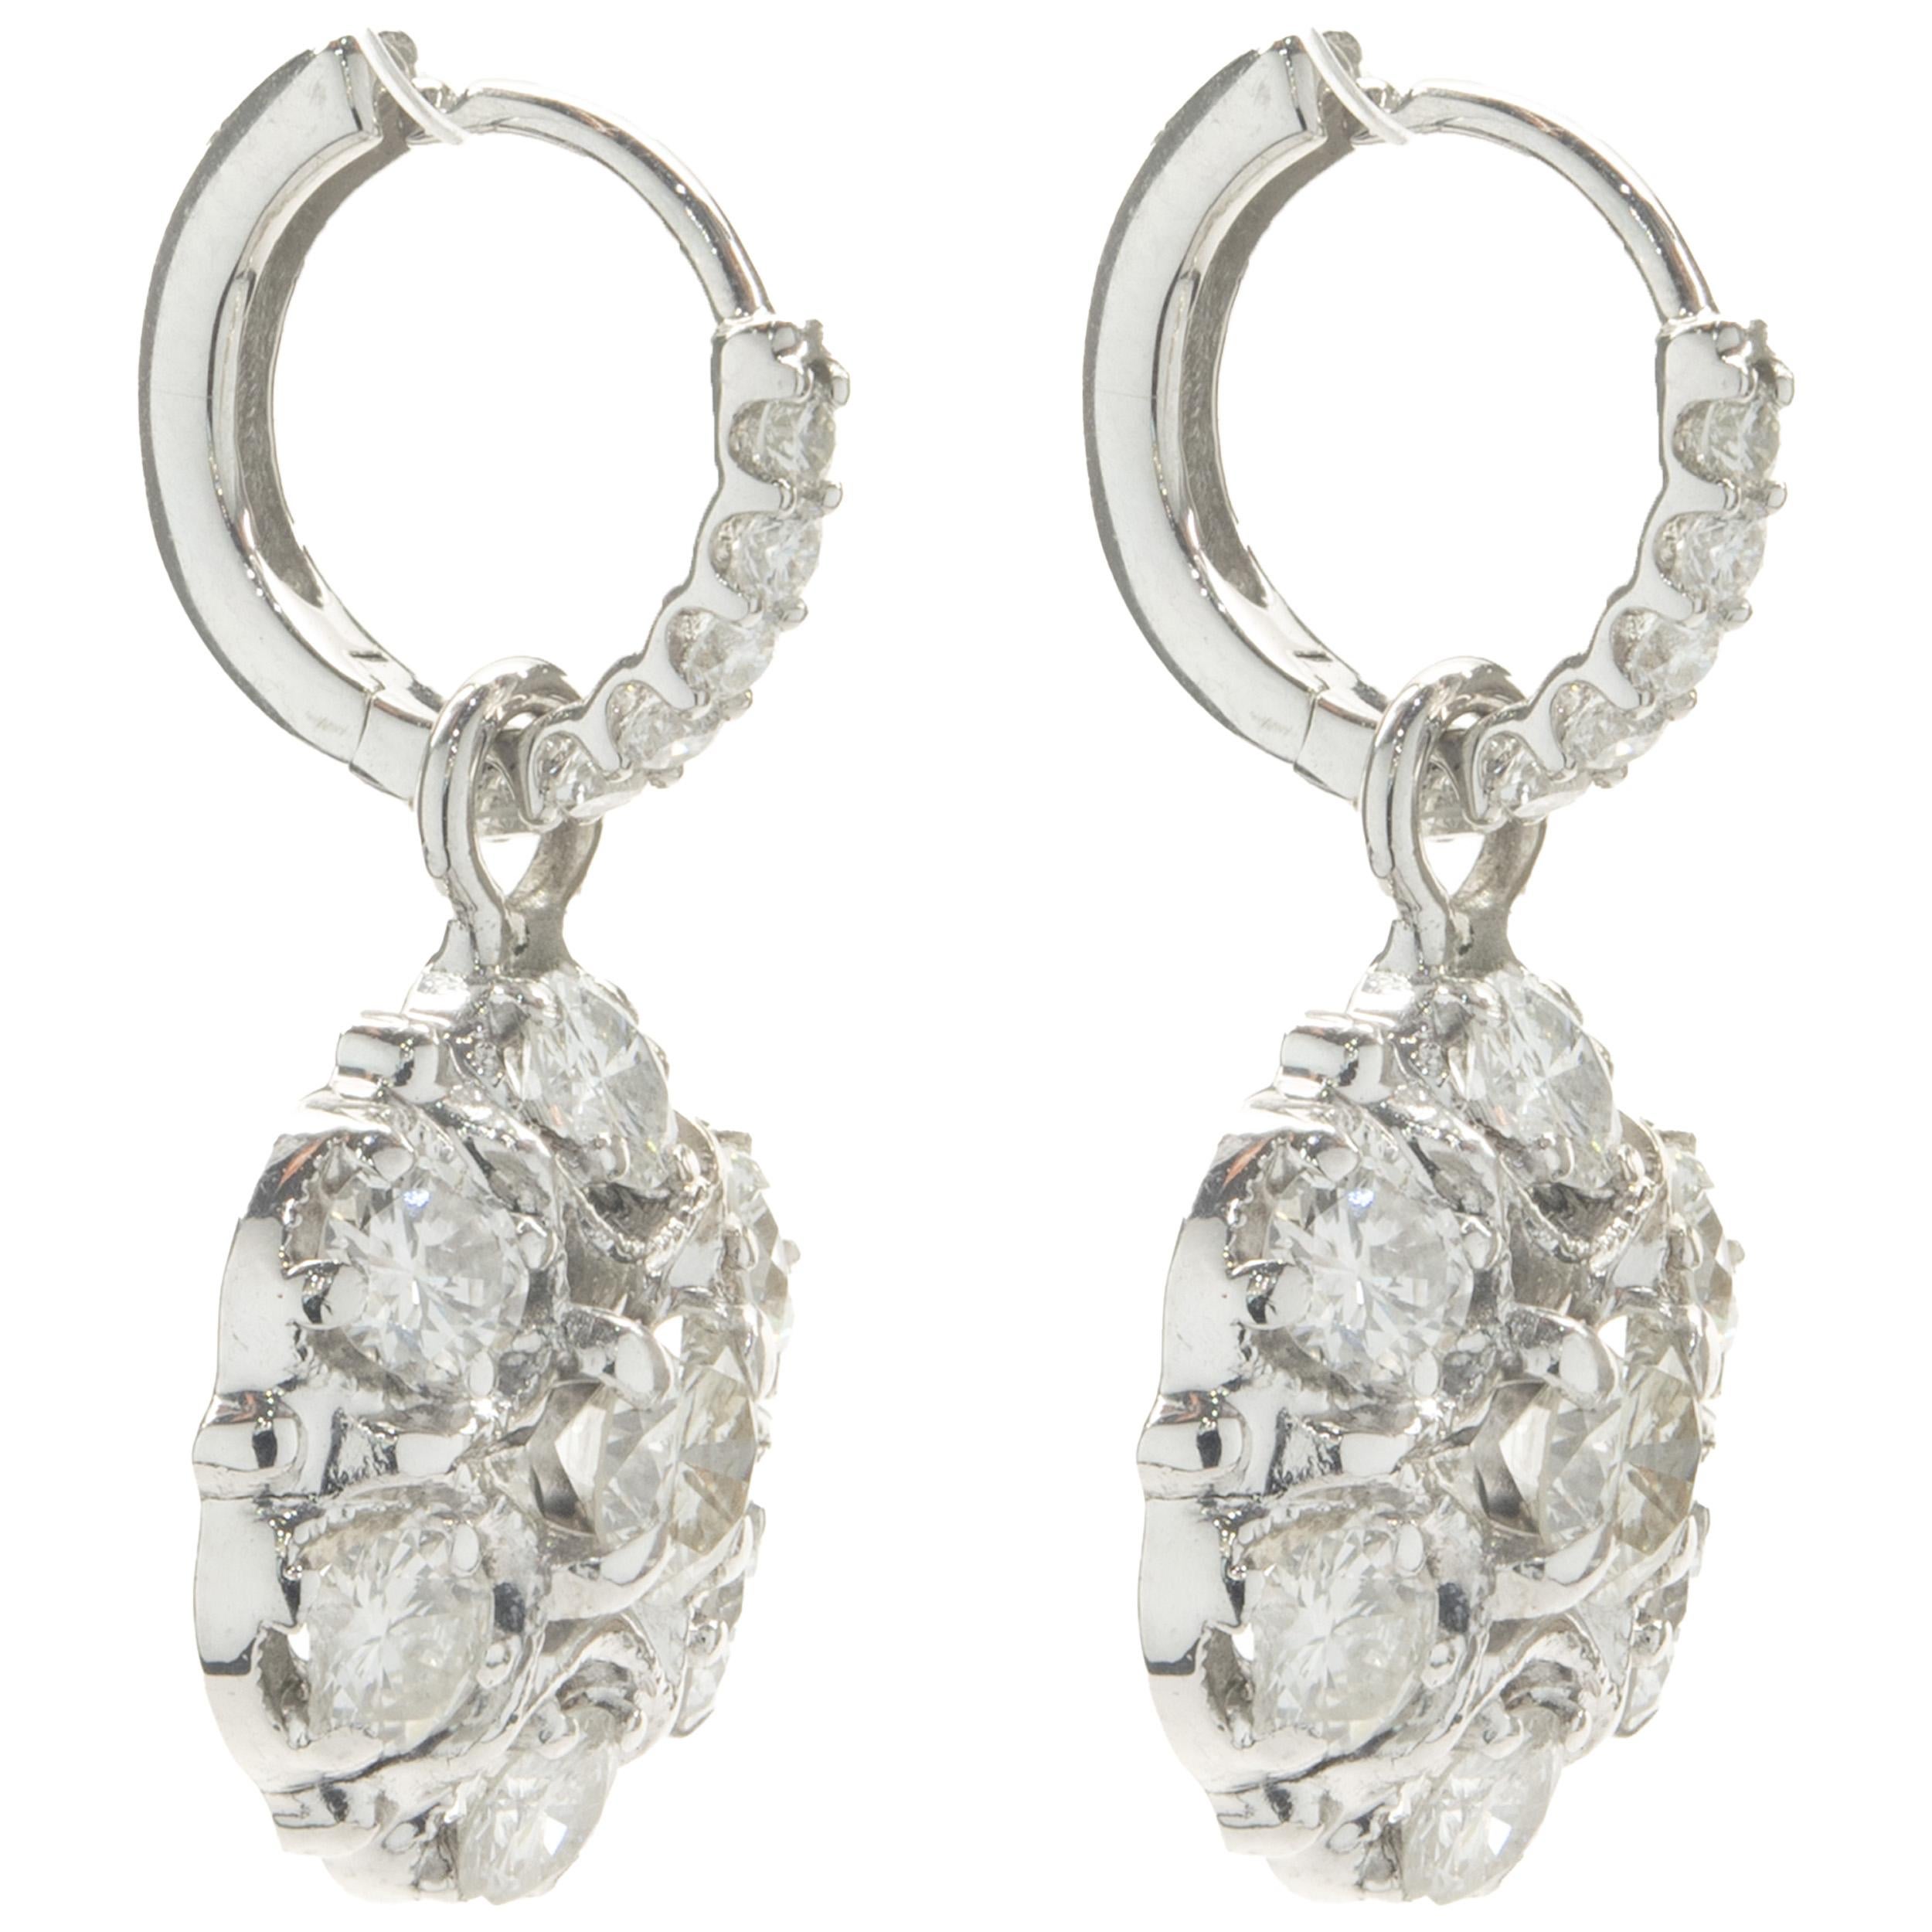 Designer: custom design
Material: 14K white gold
Diamond: 26 round brilliant cut = 3.38cttw
Color: G / H
Clarity: SI1
Dimensions: earrings measure 25.50mm long
Weight: 6.58 grams